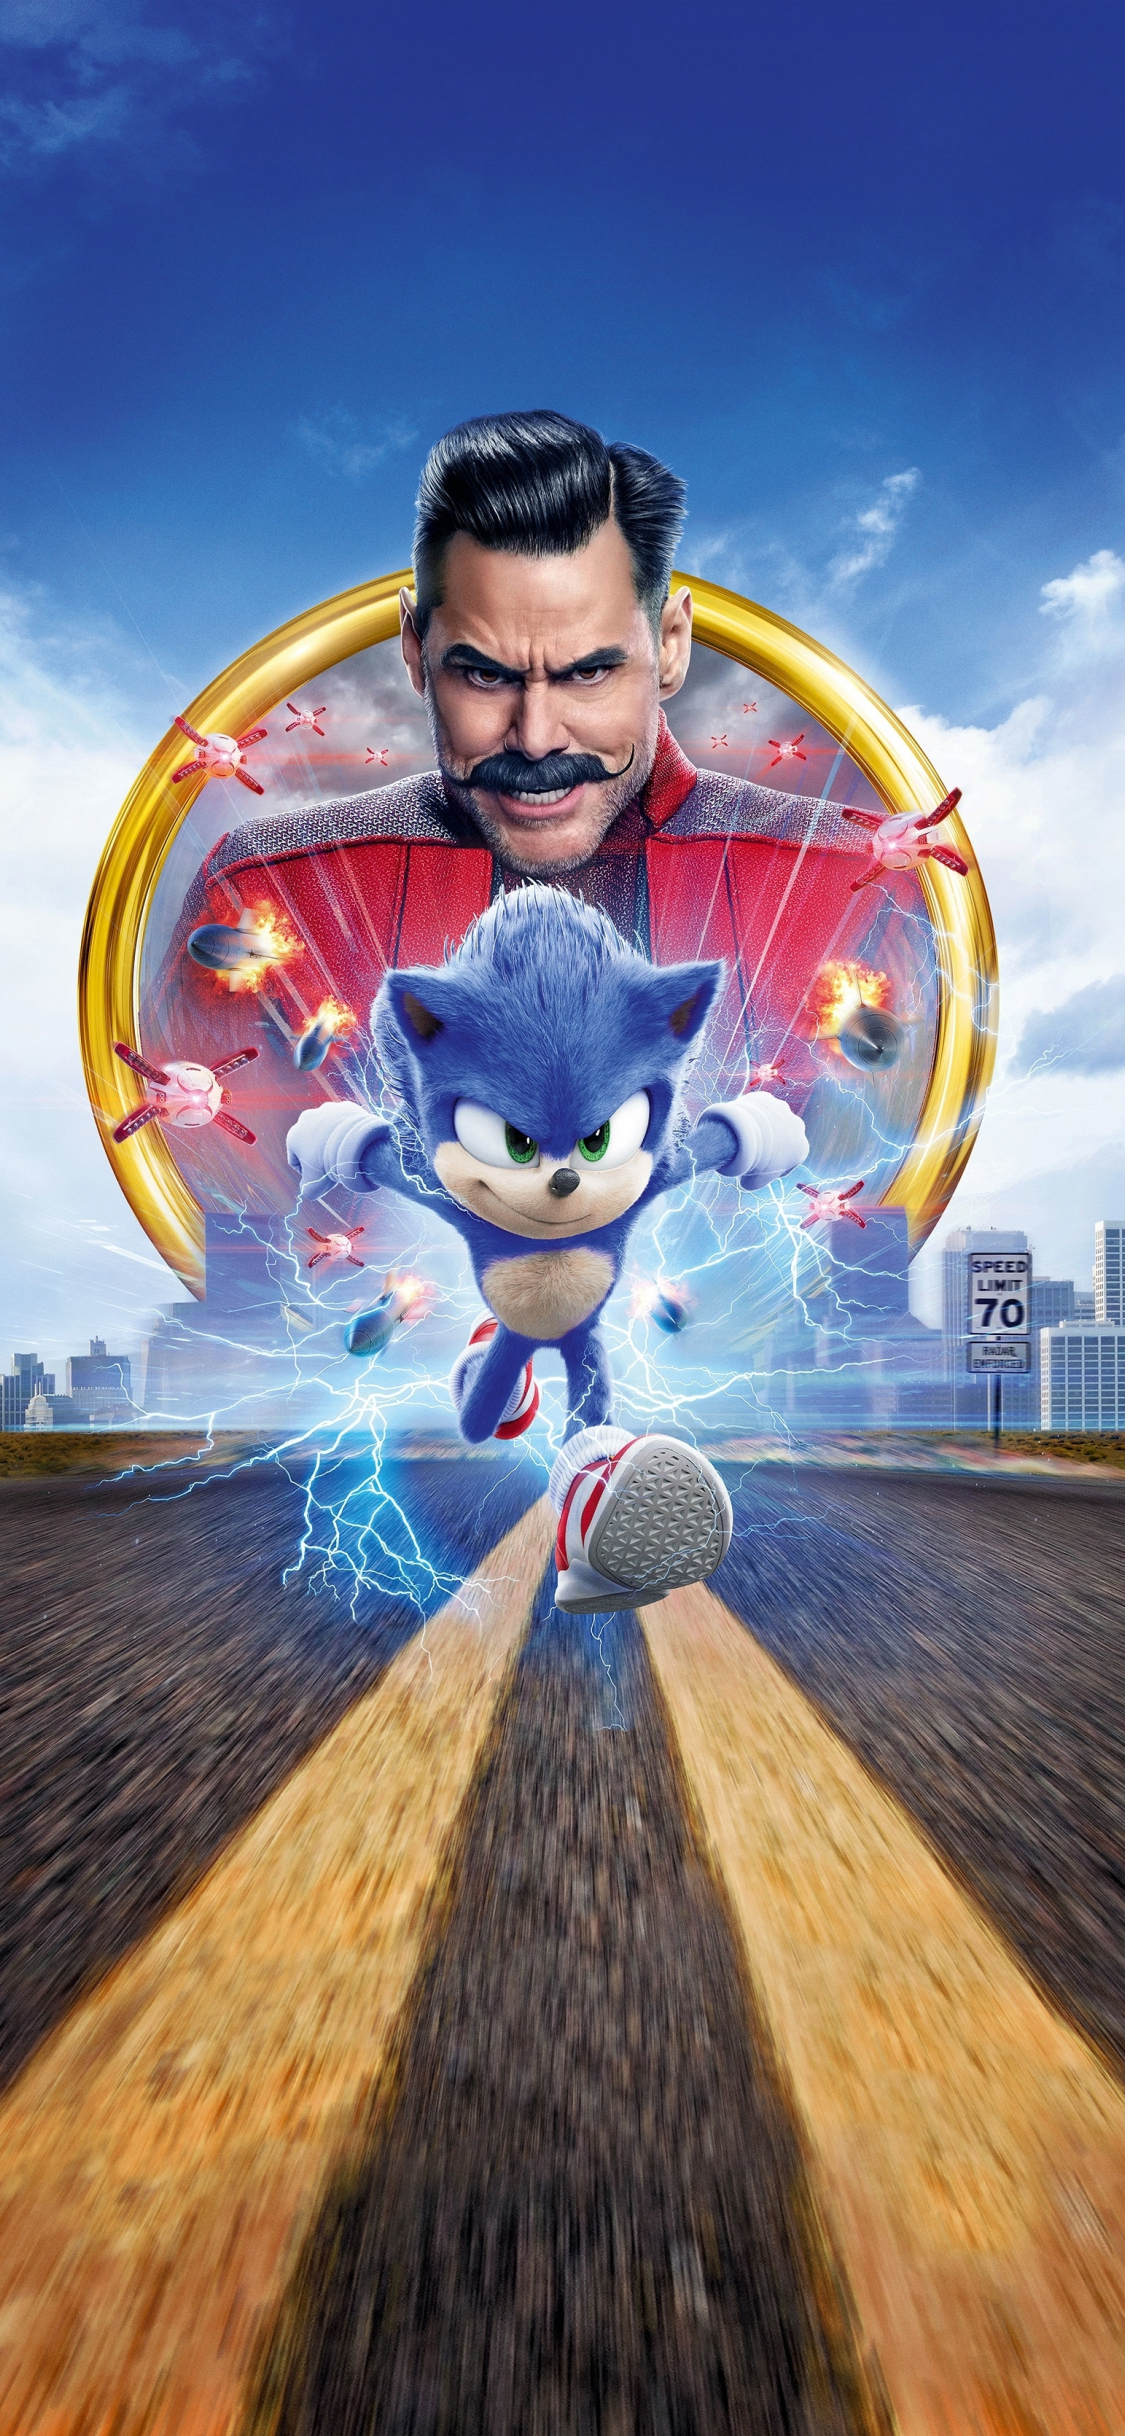 Download 1125x2436 Wallpaper Sonic The Hedgehog Movie Iphone X 1125x2436 Hd Image Background